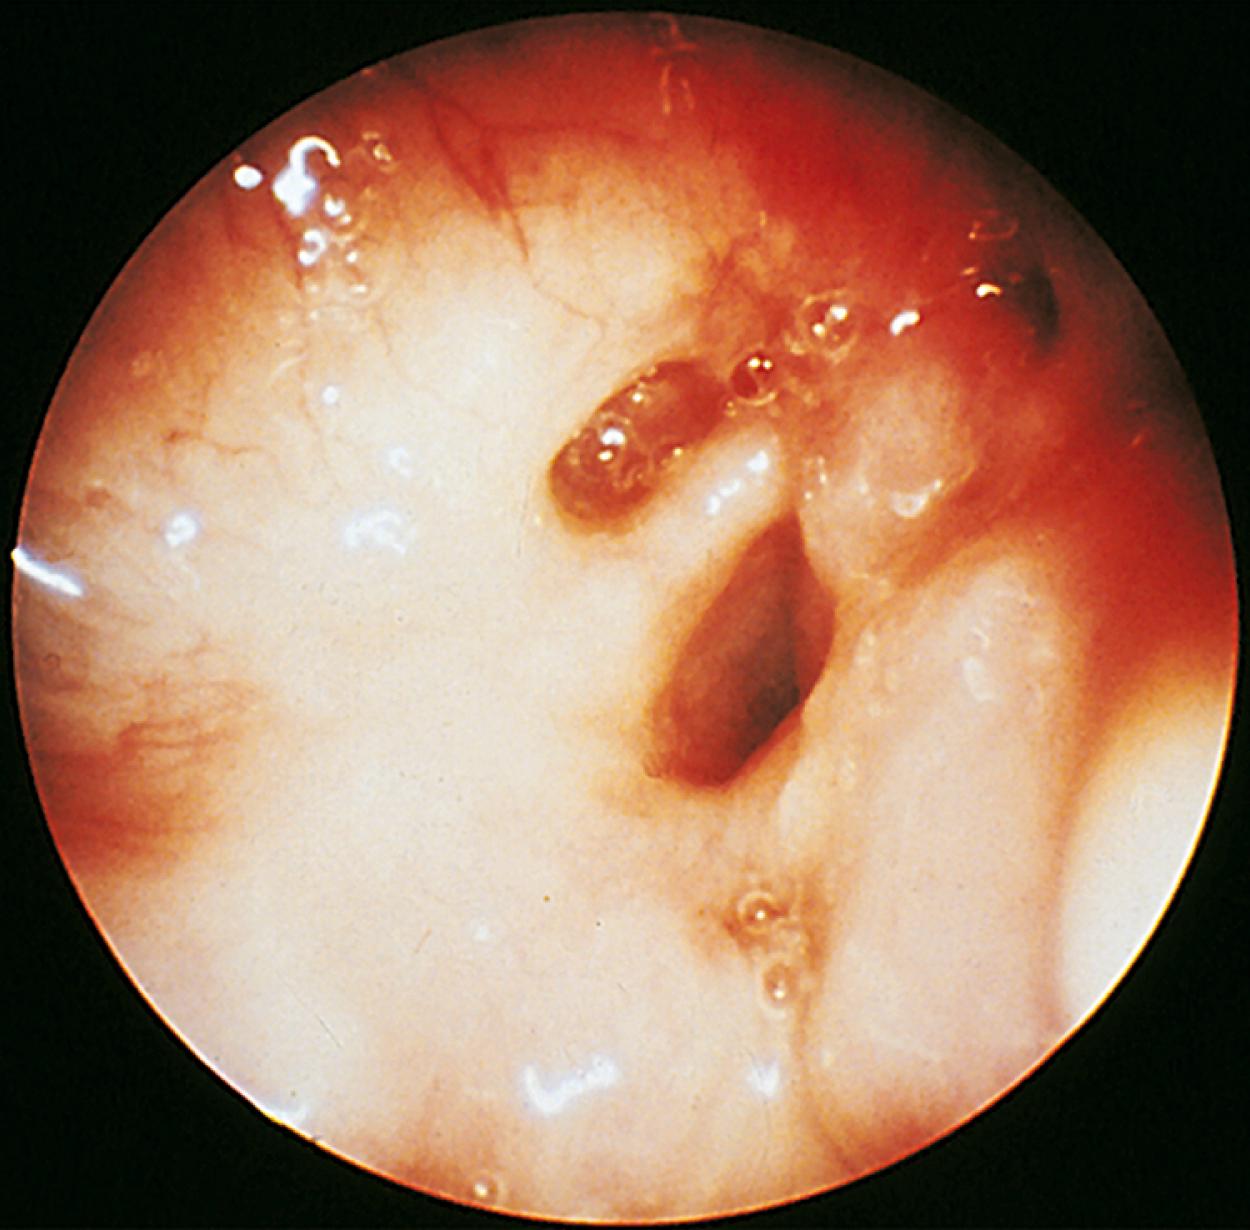 Fig. 17.3, Laryngeal web. Expiratory view of a laryngeal web in an infant with inspiratory stridor that was exaggerated by crying noted at birth. The web is seen traversing the area of the glottis.